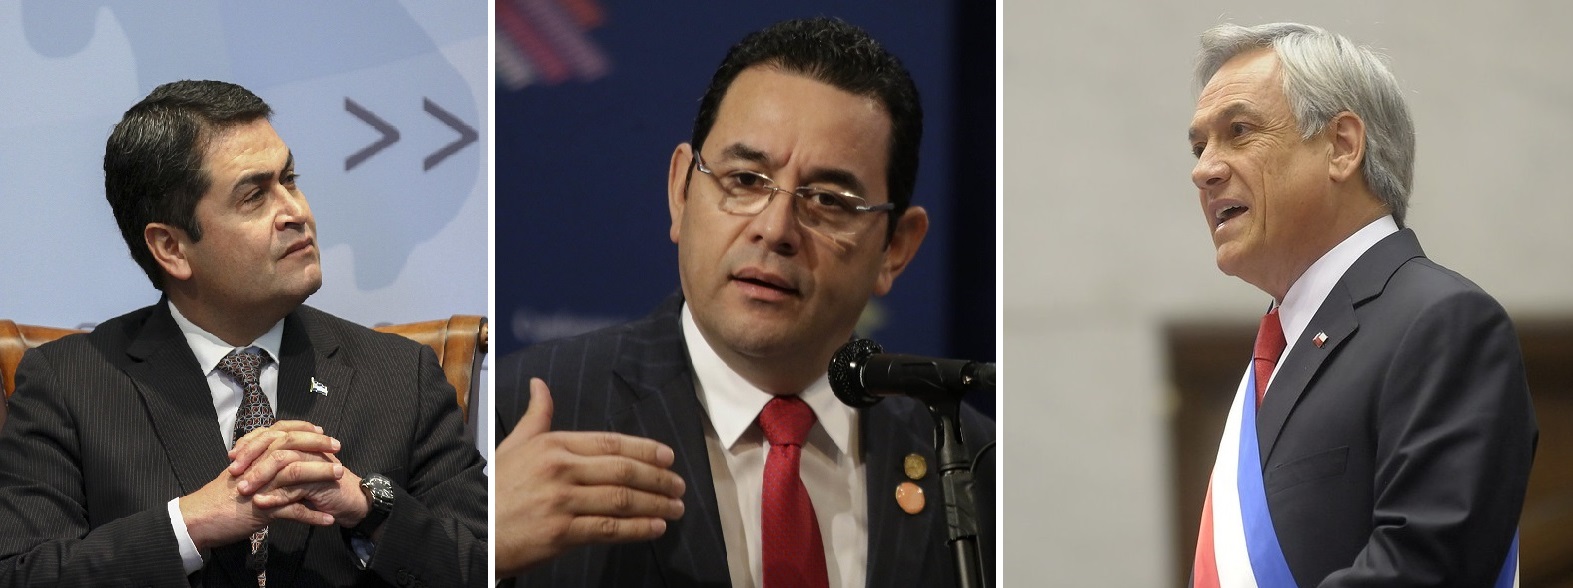 Three presidents who have been singled out for receiving illicit funding in their campaigns: Juan Orlando Hernández, from Honduras; Sebastián Piñera, from Chile, and Jimmy Morales, from Guatemala. Image credit: Presdiencia El Salvador, CSIS, Gobierno de Chile@flckr